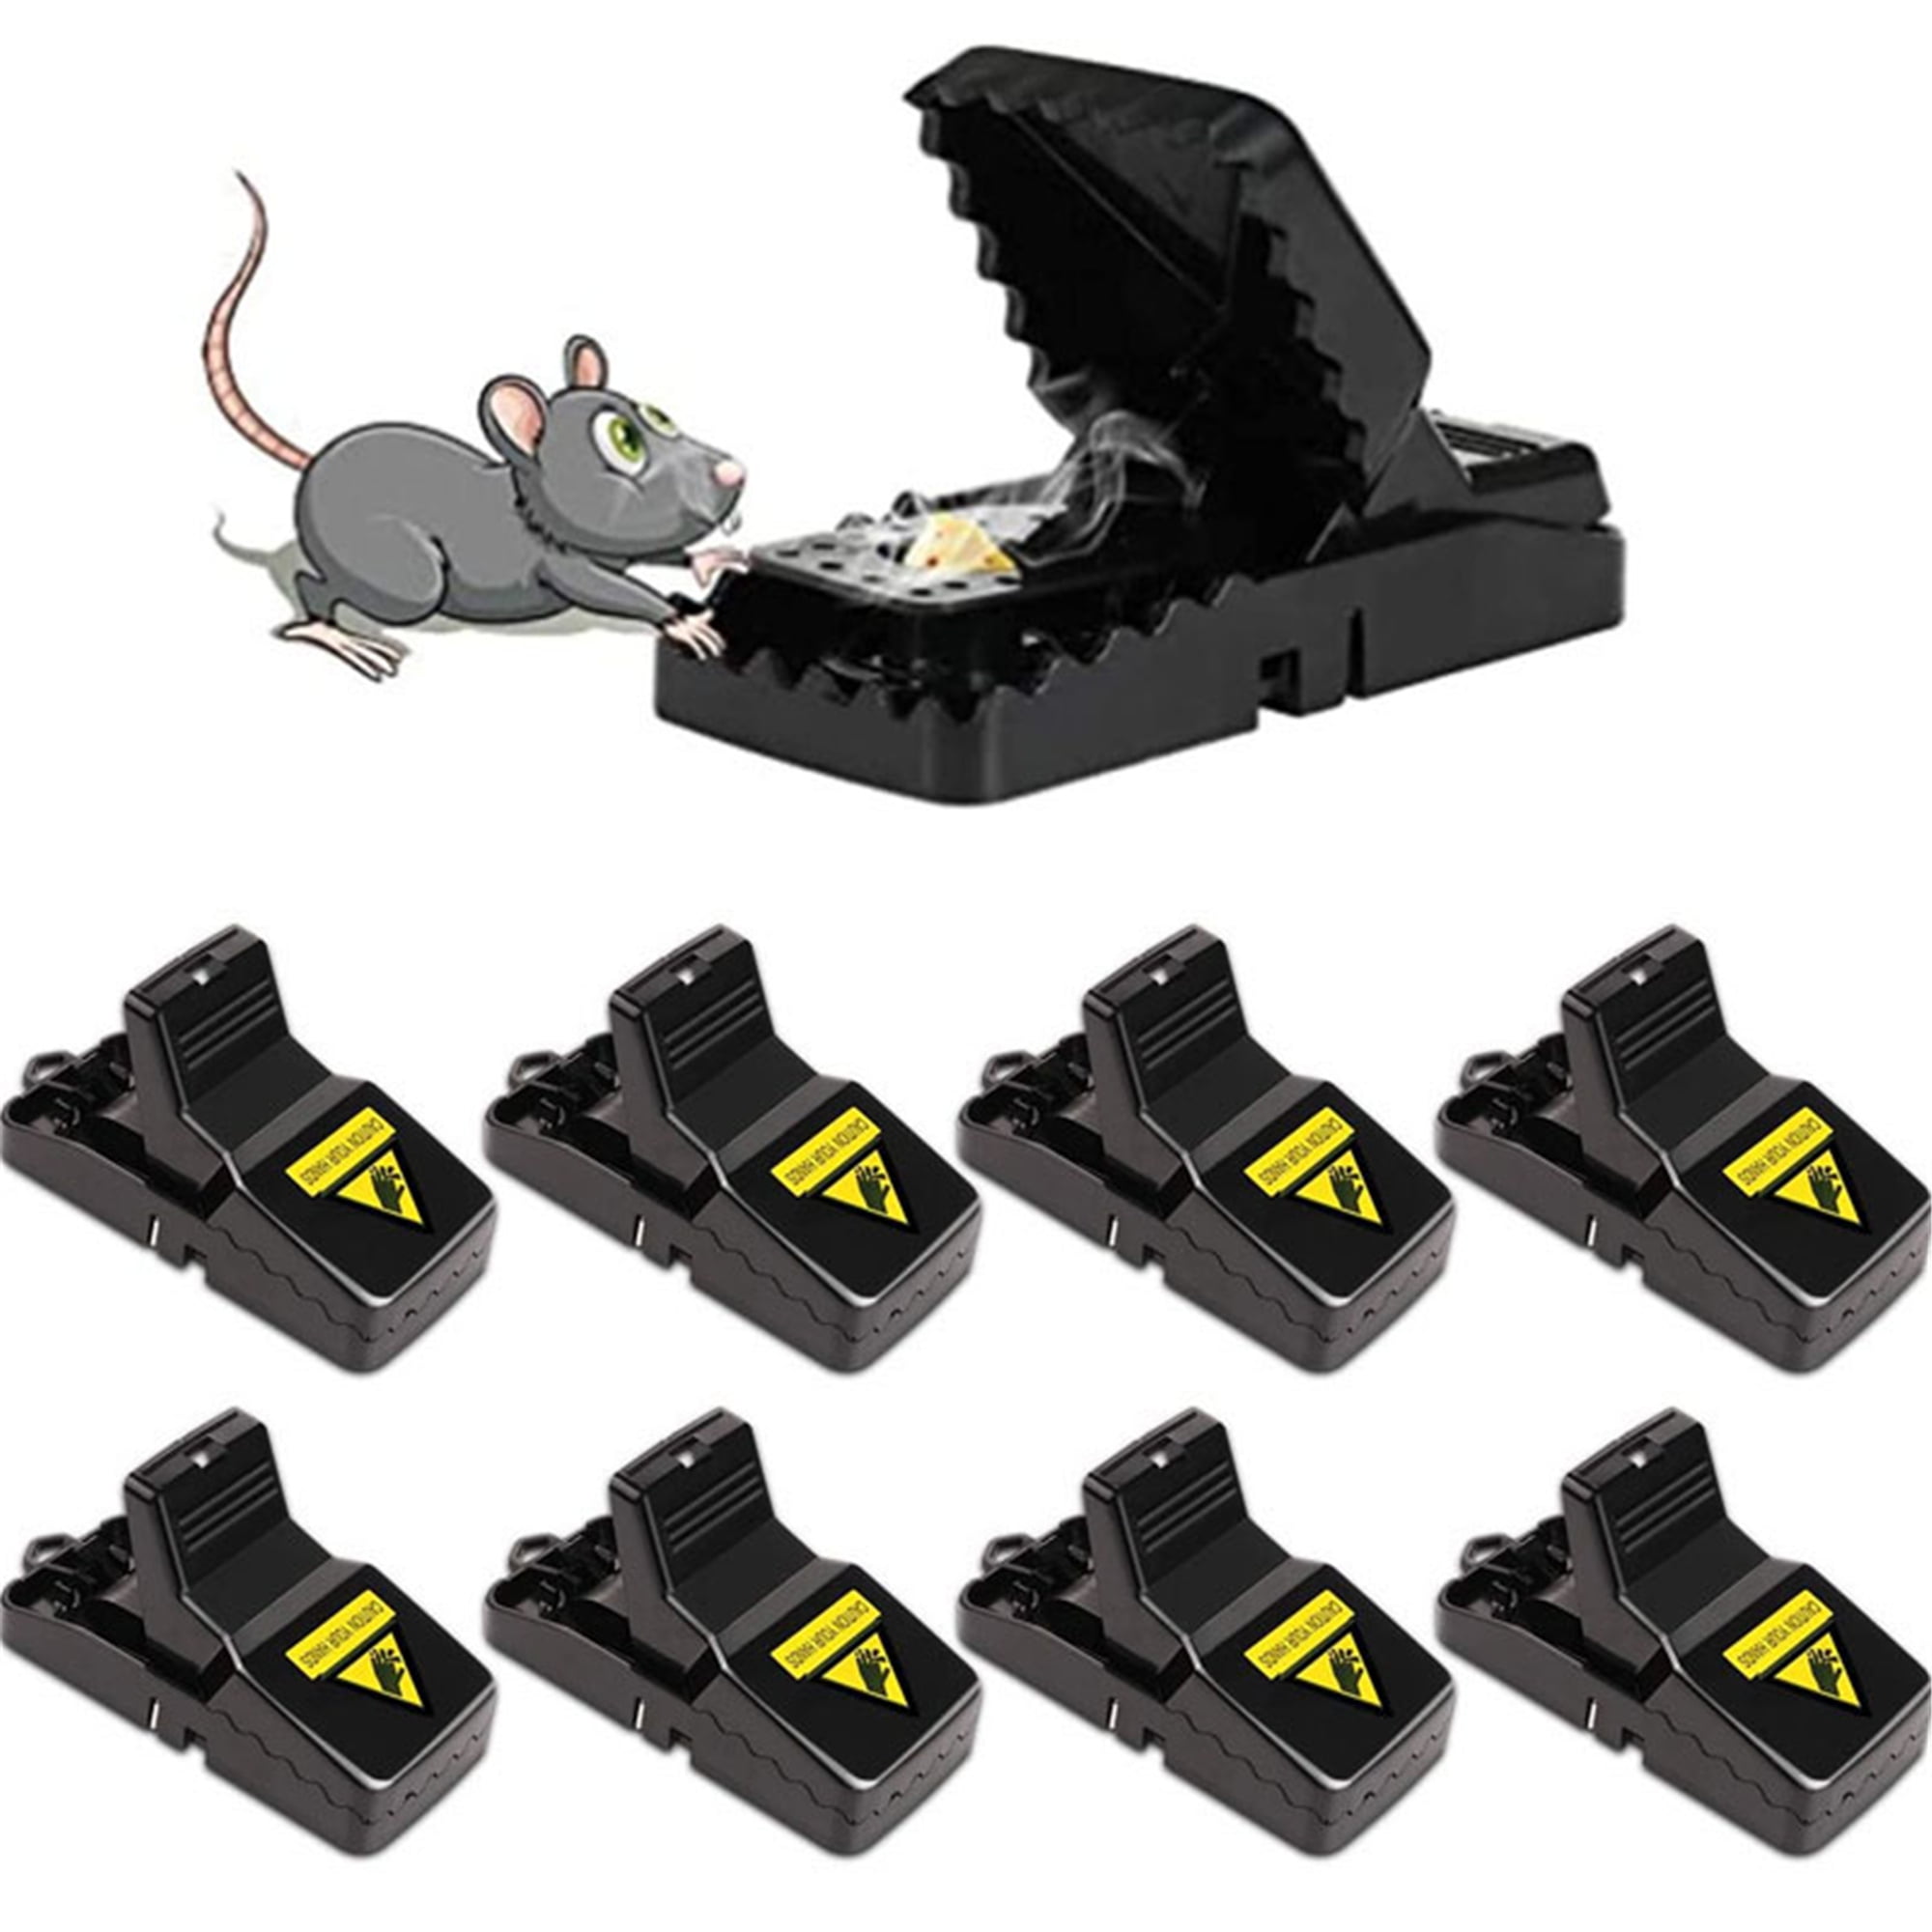 Elbourn Outdoor Mouse Traps, Mice Traps for House, Quick Effective Sanitary  Safe Mousetrap Catcher for Family and Pet - 8 Pack 